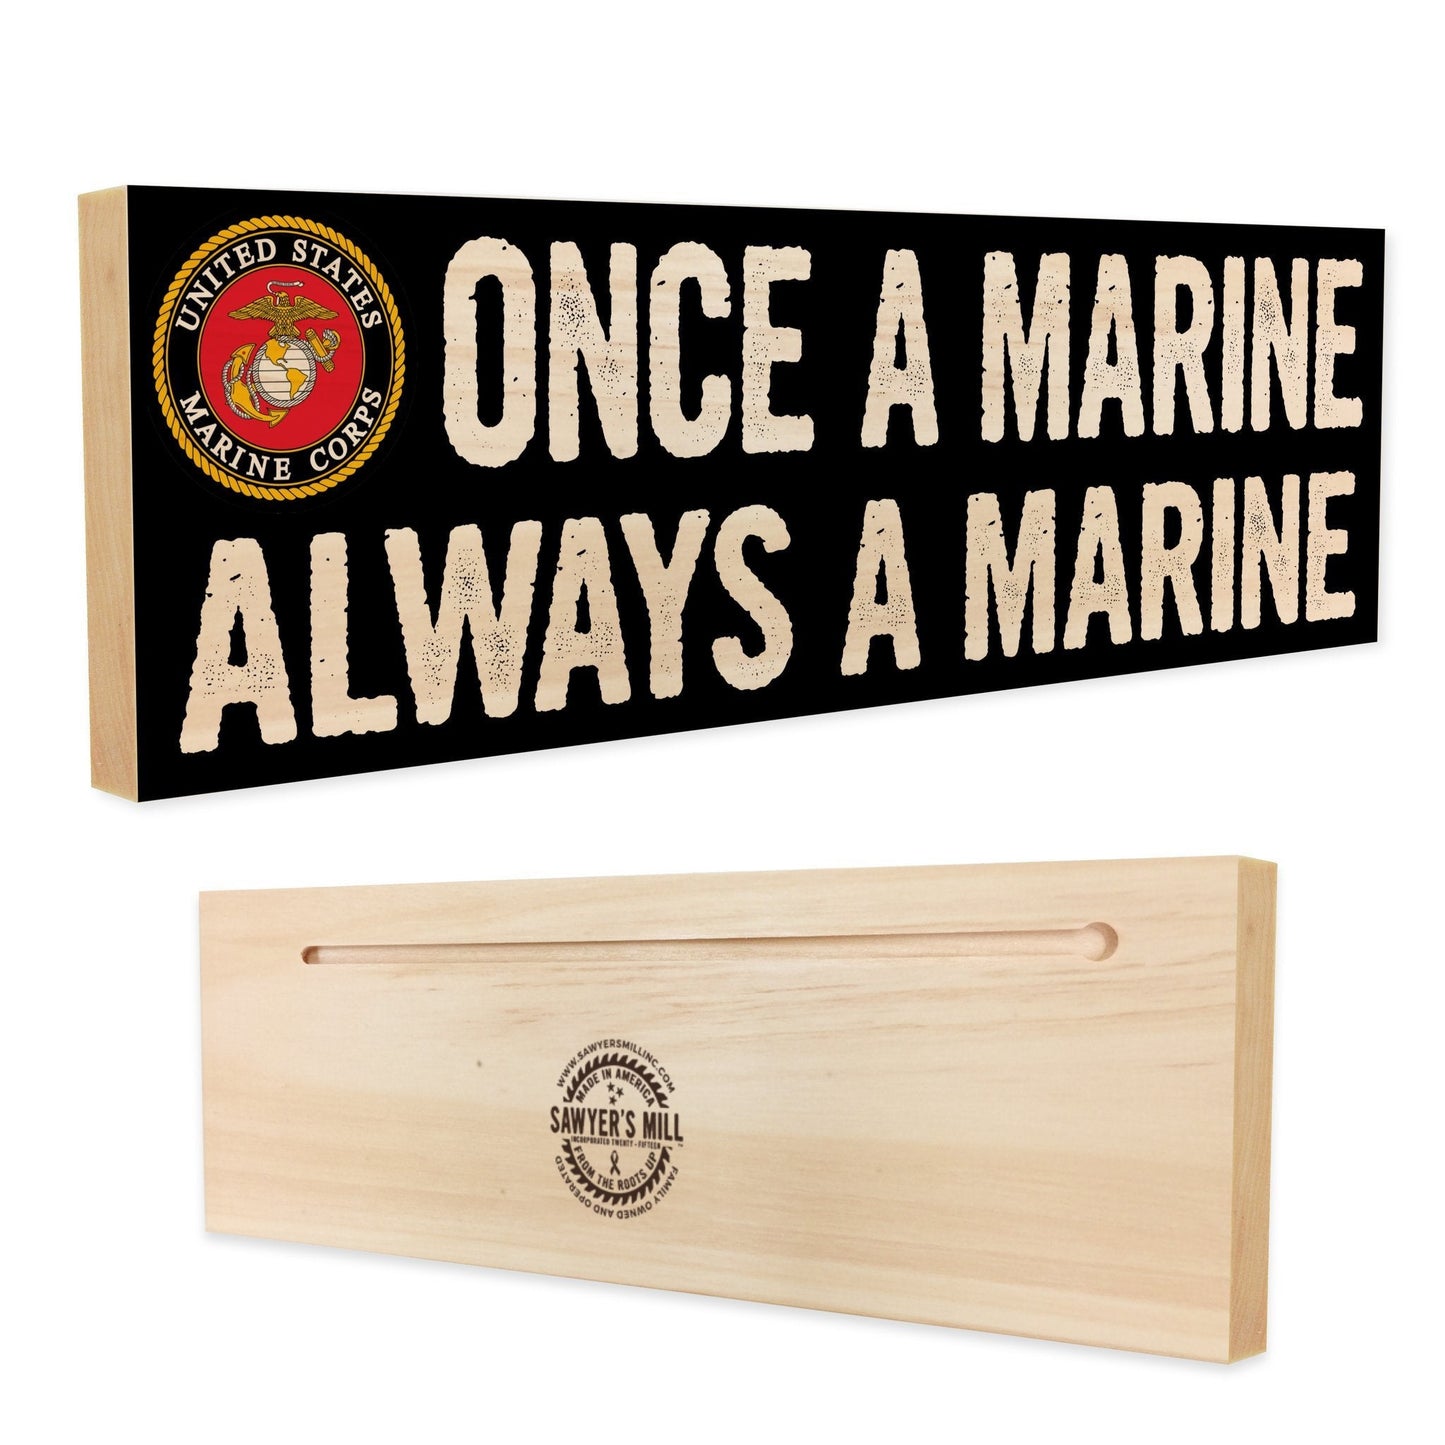 Introducing our handmade wood sign featuring the iconic Marine Corps Globe and Eagle graphic and the text "Once a Marine, Always a Marine". 